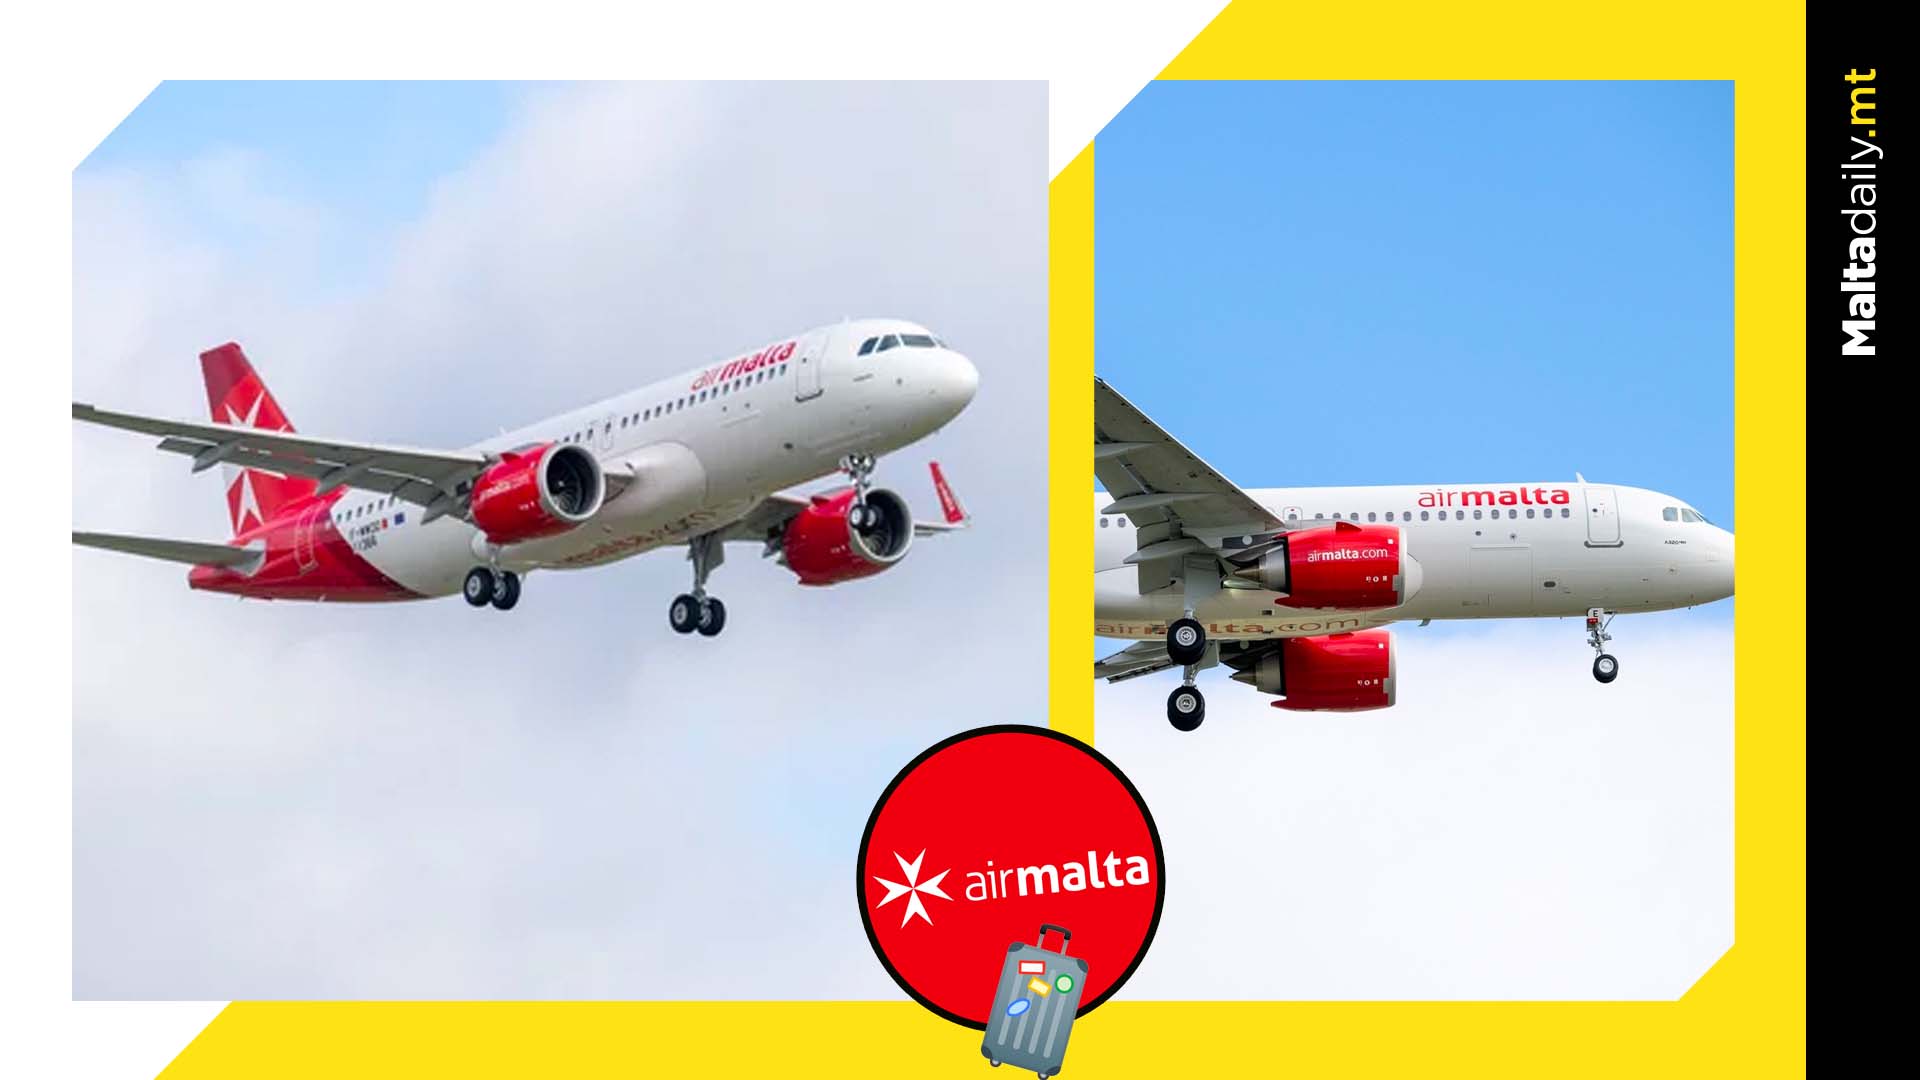 More planes, more travel: AirMalta welcomes 5th airbus A320neo